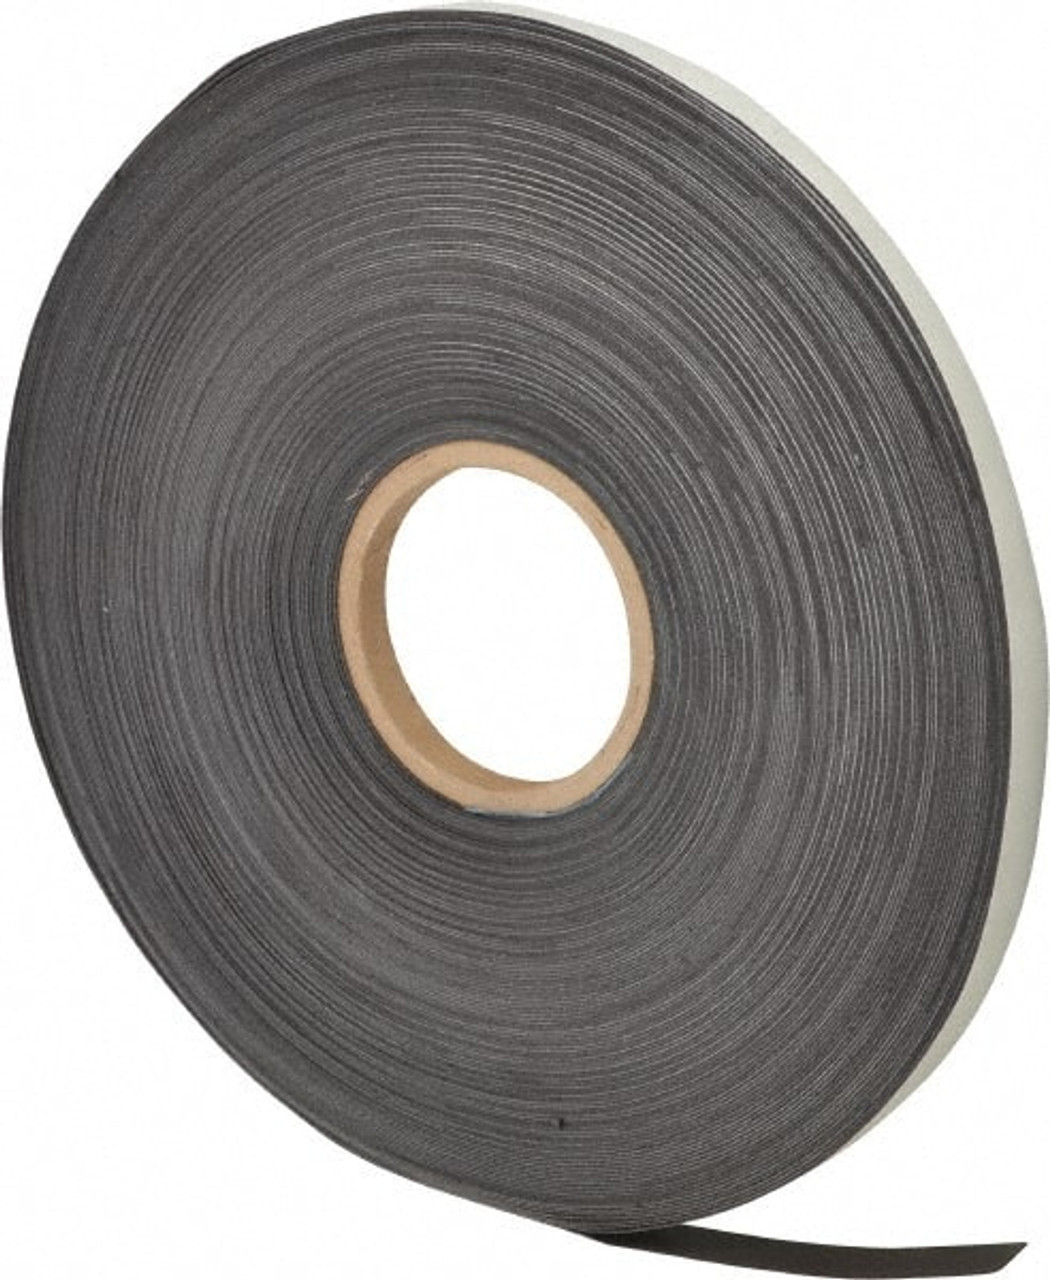 1/2 WIDE MAGNETIC SELF ADHESIVE TAPE